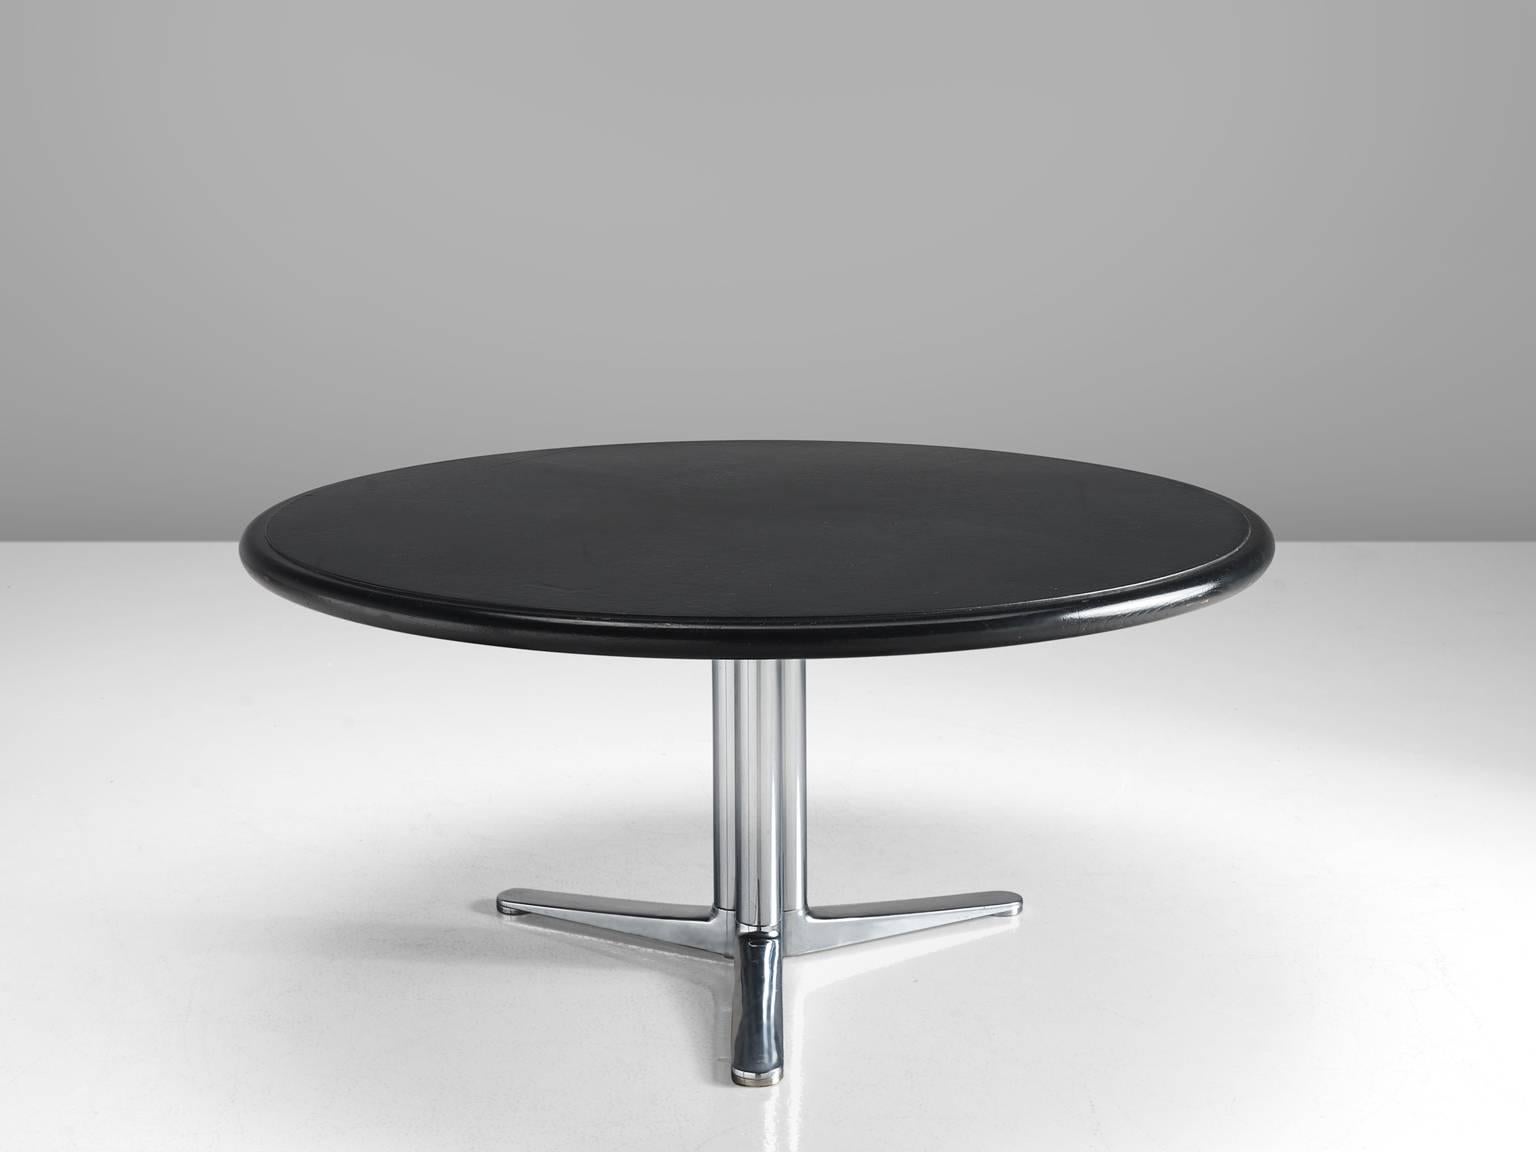 Warren Platner for Knoll International, dining table, in wood, black leather and steel, United States, 1960s.

This heavy, sturdy table is designed by the American modernist Warren Platner. He is most known for his airy metal, sculptural lounge